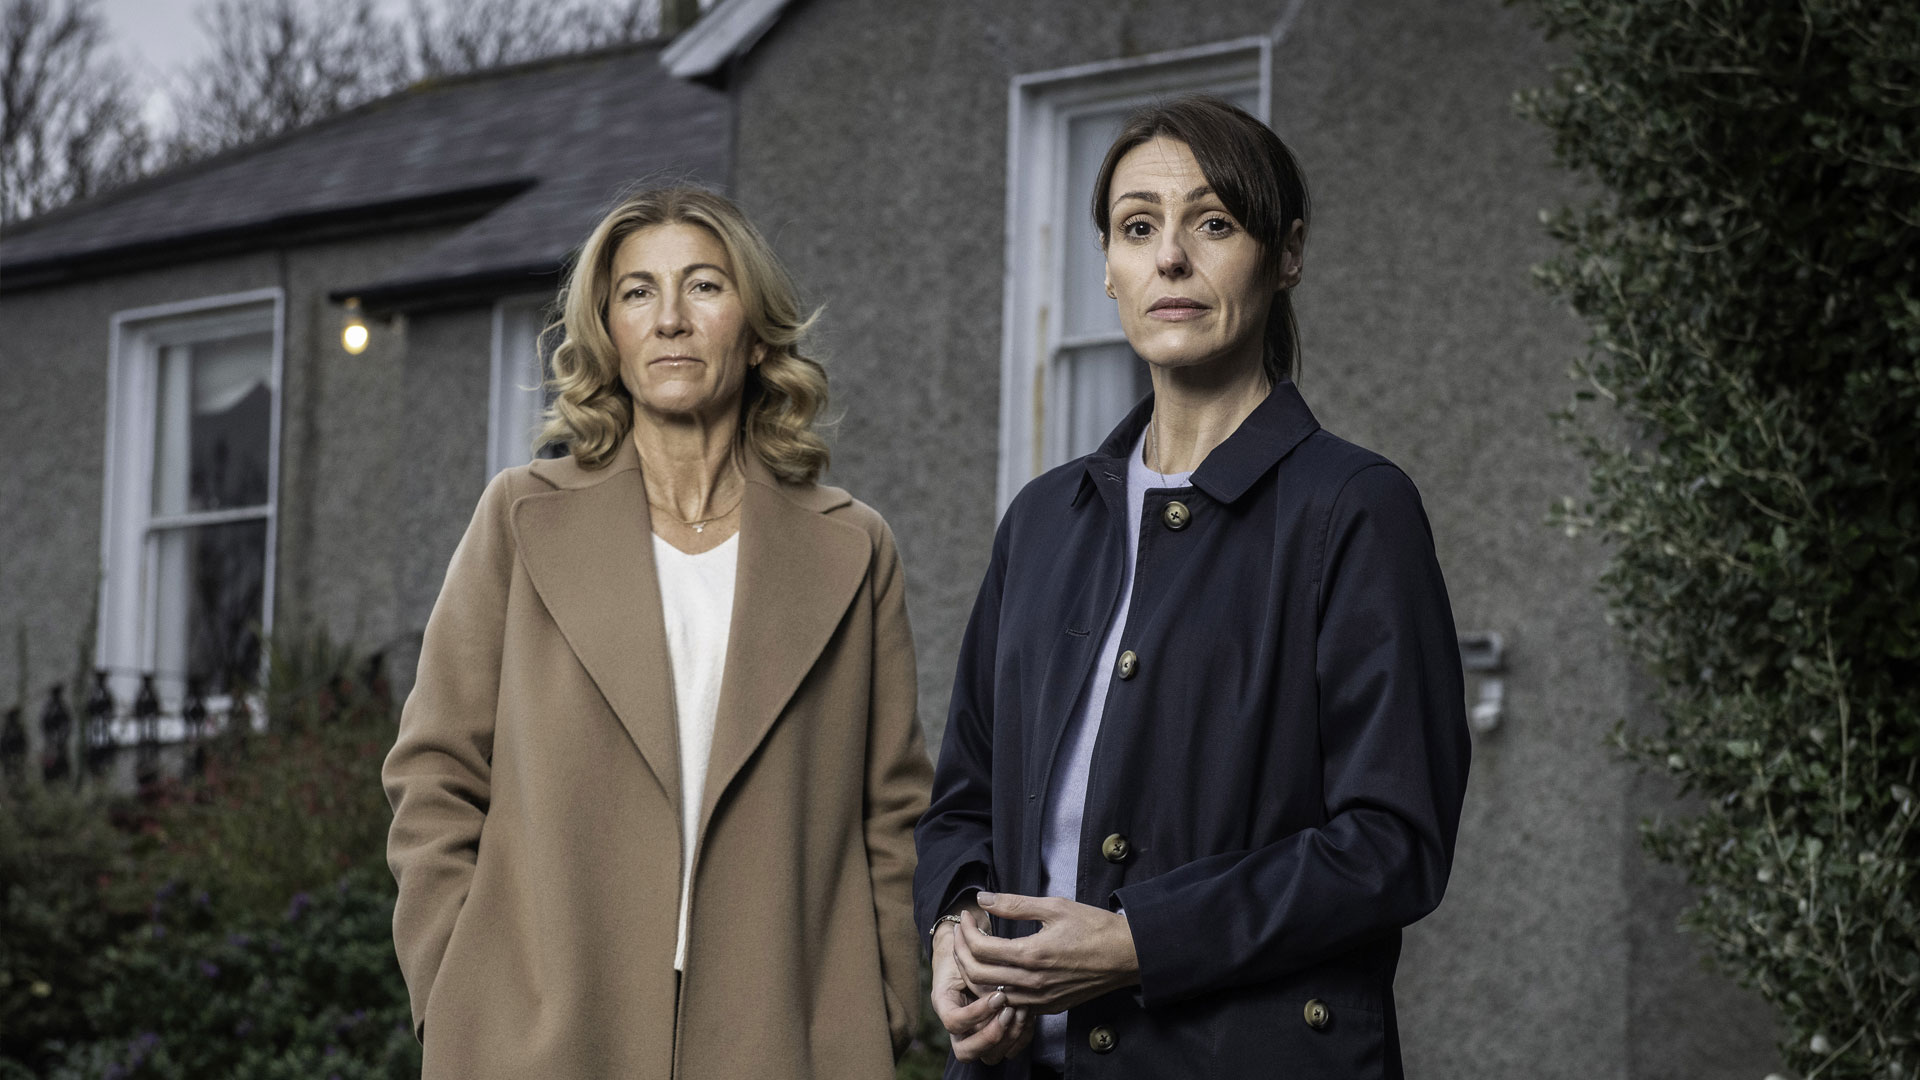 Watch out for the new three-part series MaryLand, starring Suranne Jones and Eve Best.